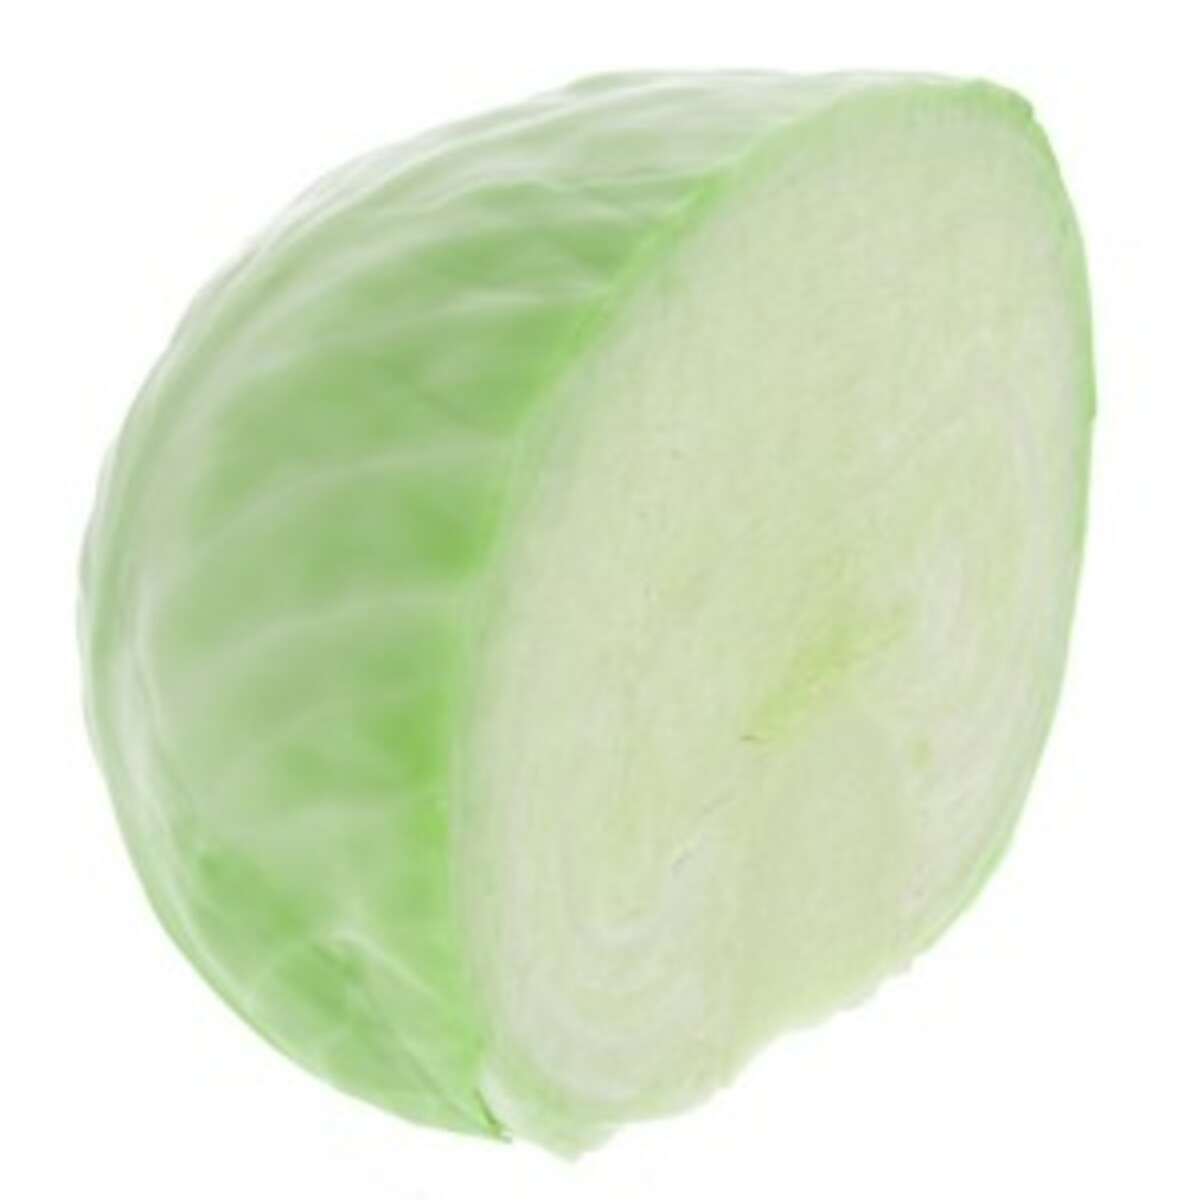 Cabbage White China 500g Approx Weight